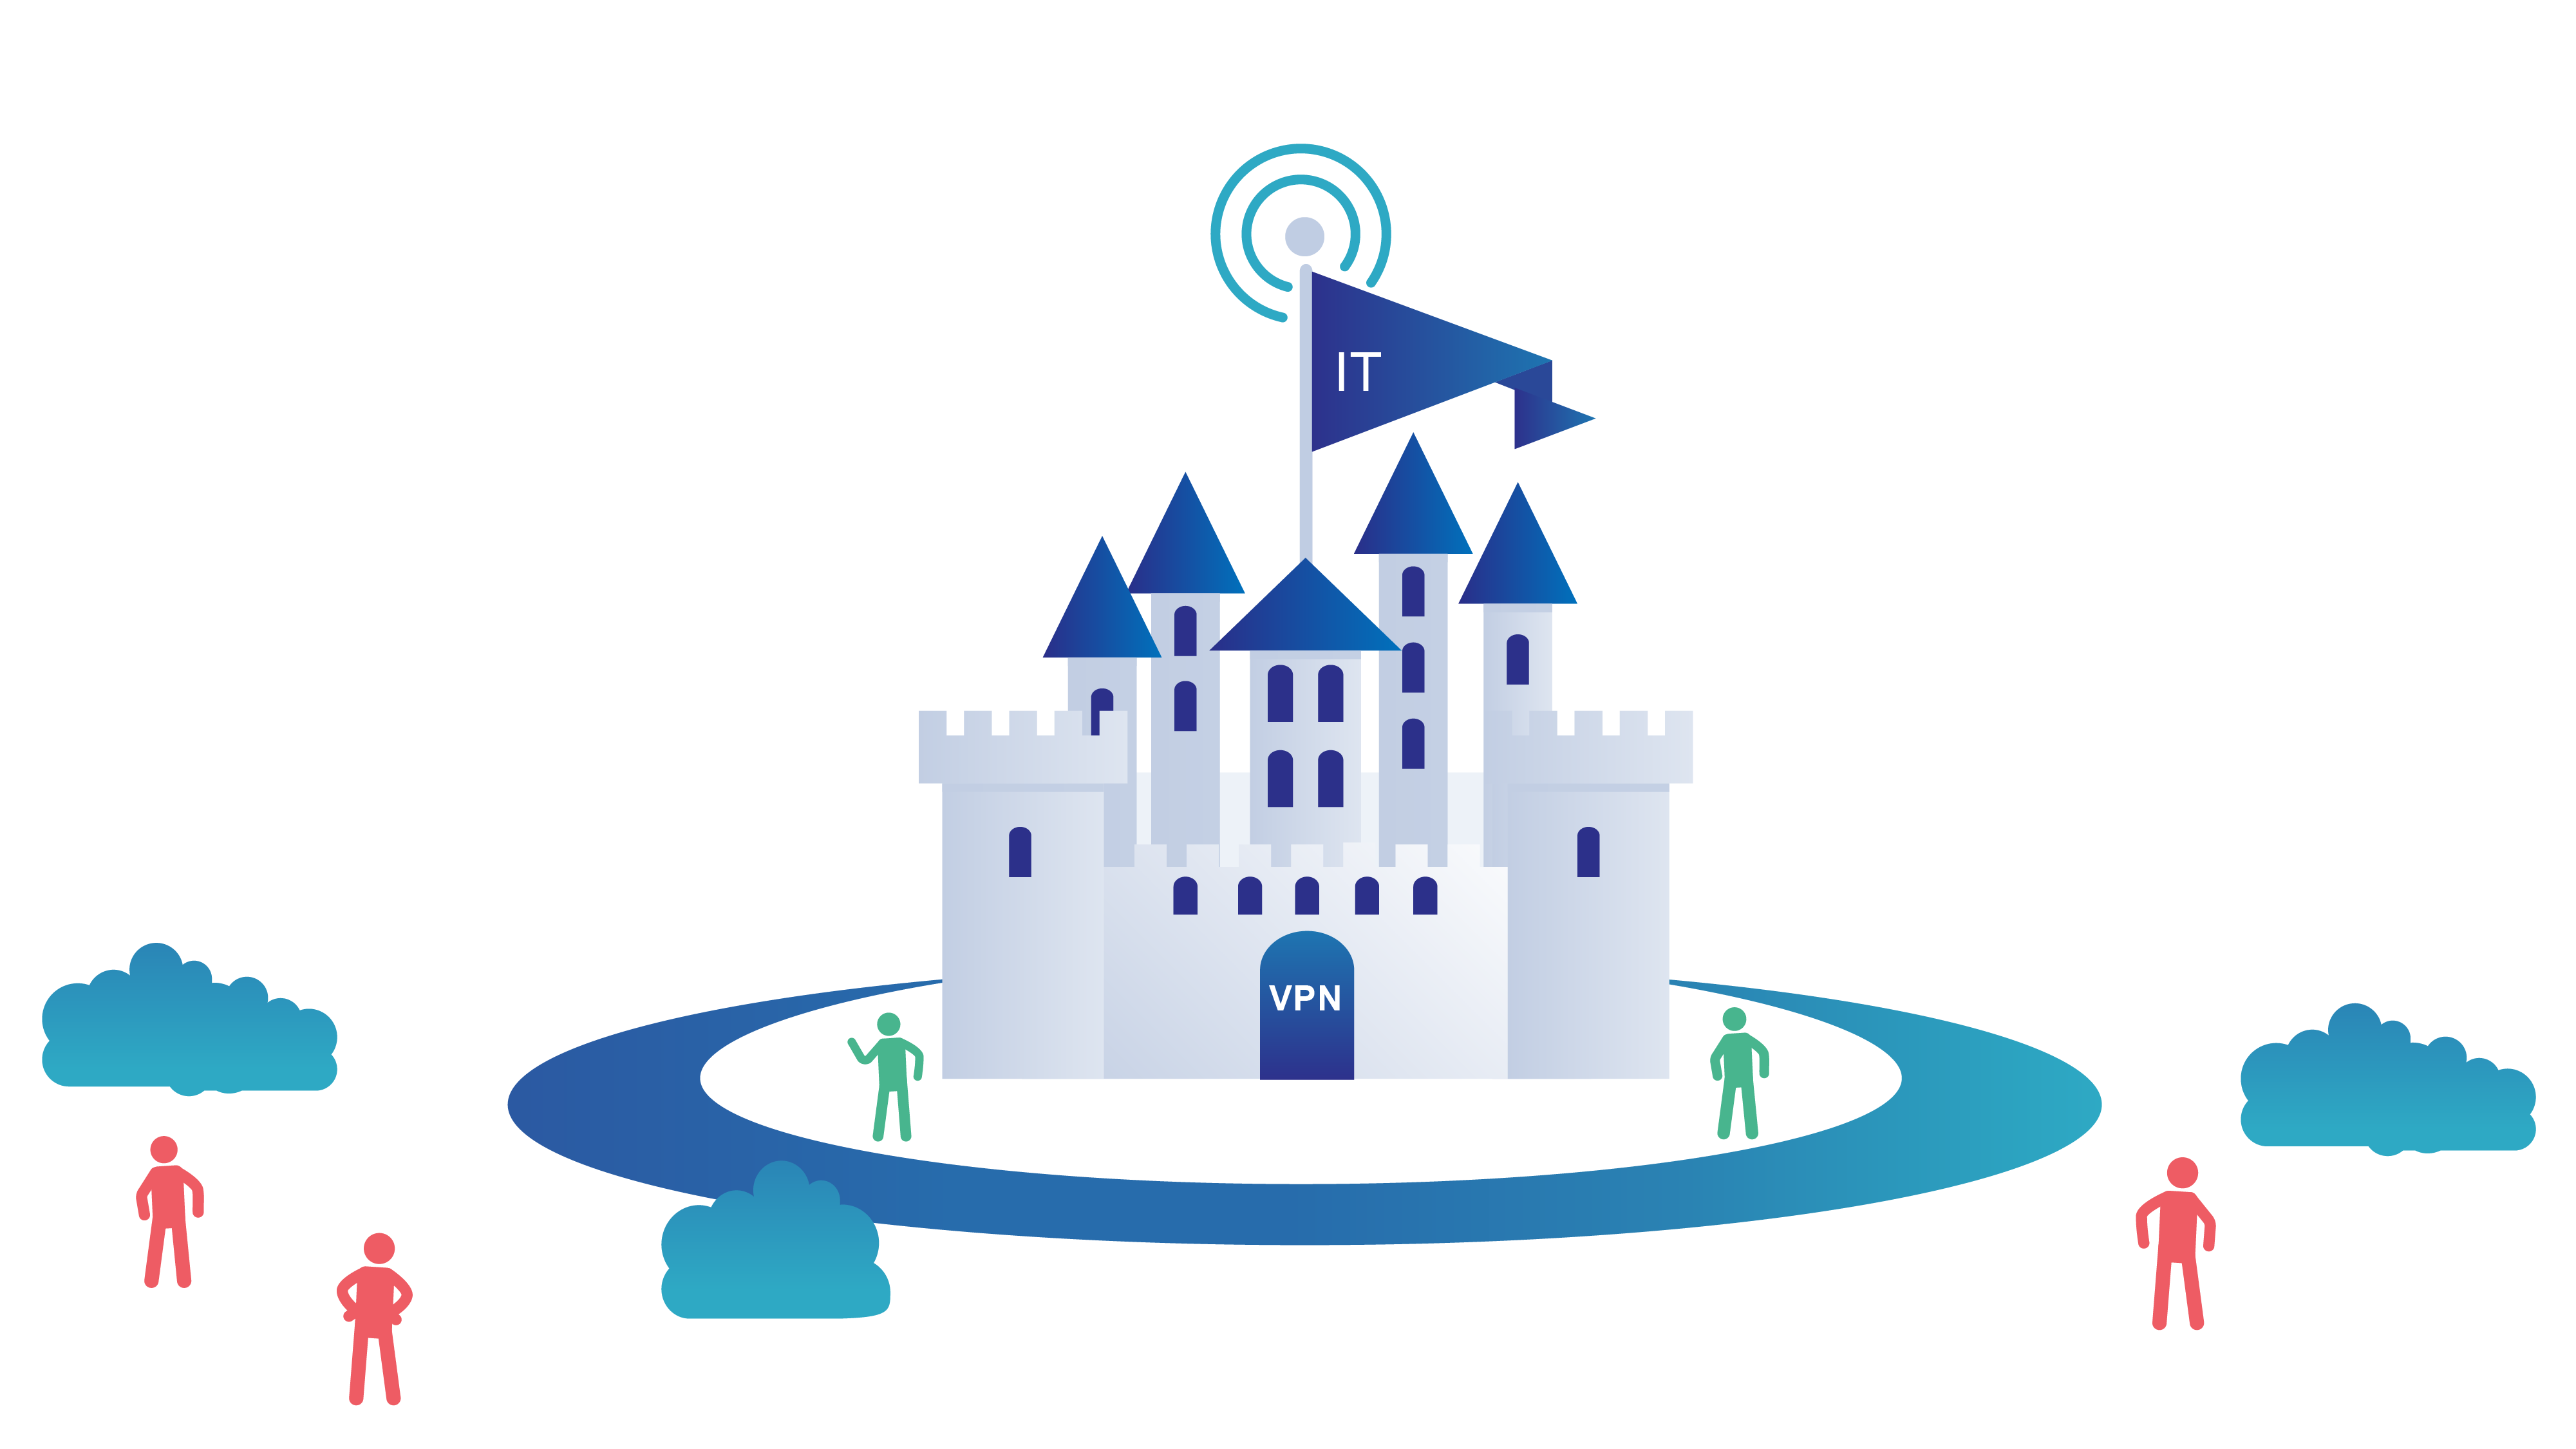 Castle-and-Moat security model, users within the VPN are trusted